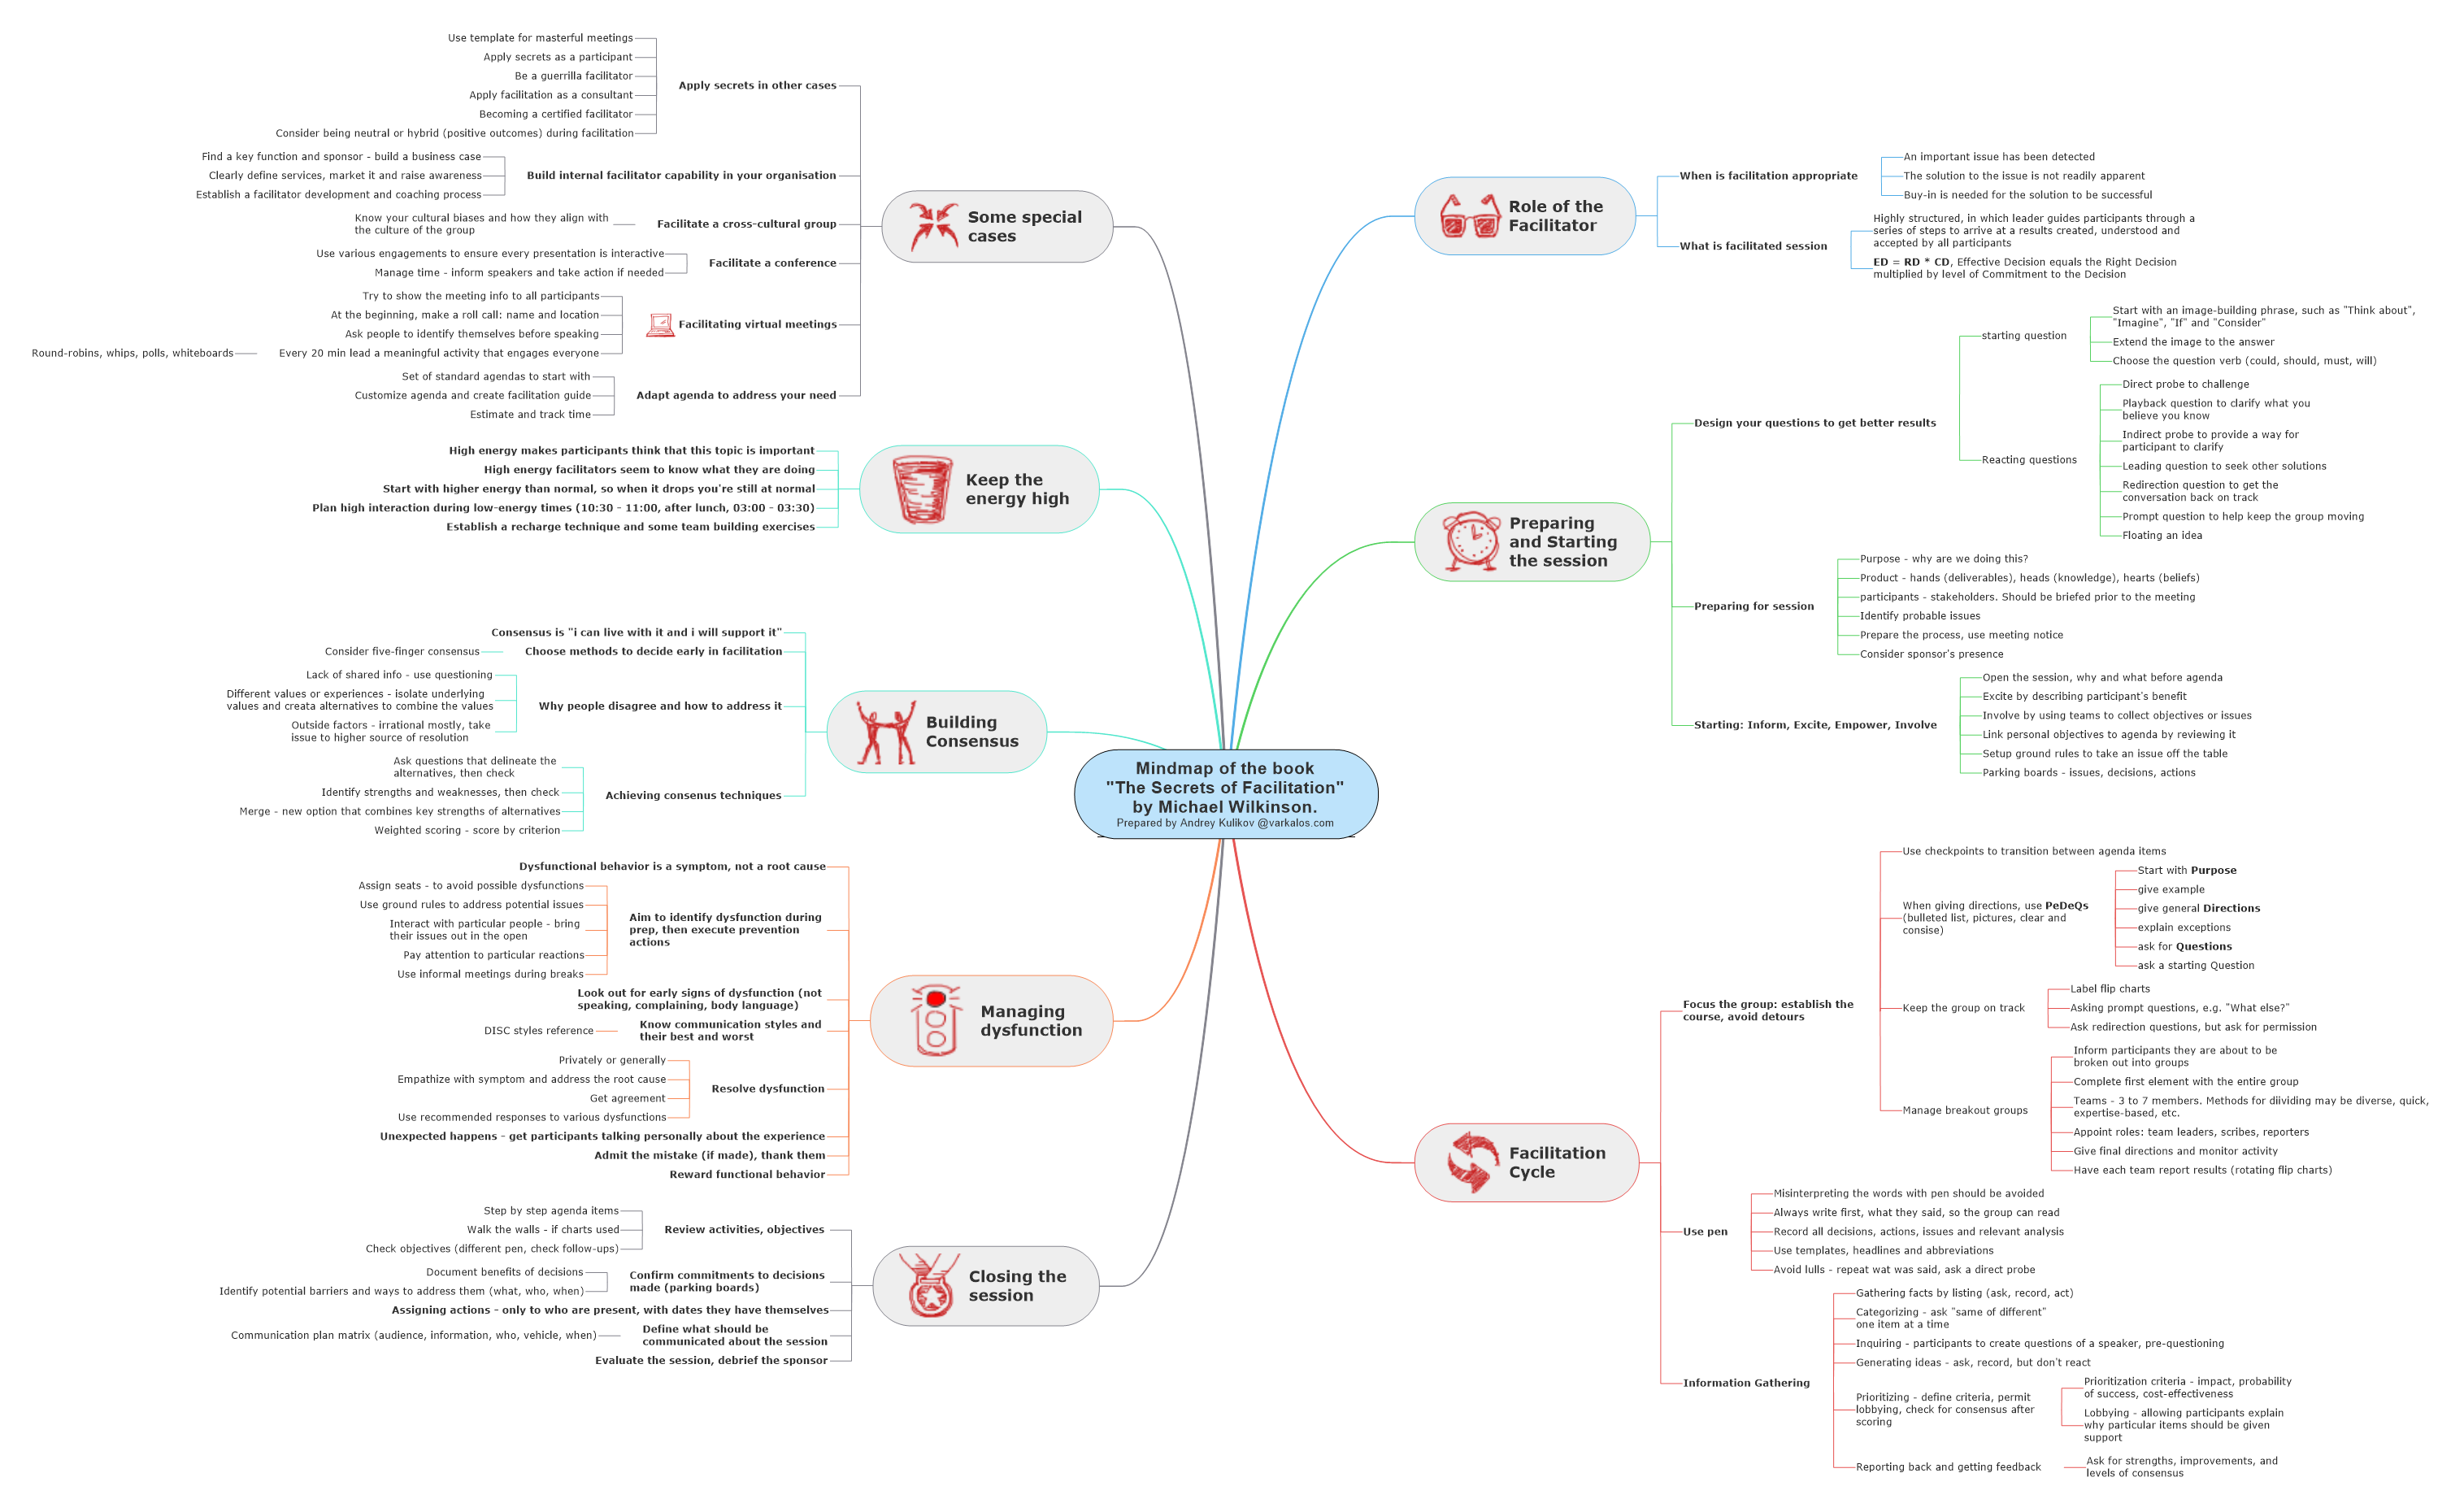 Mindmap of The Secrets of Facilitation book by M.Wilkinson